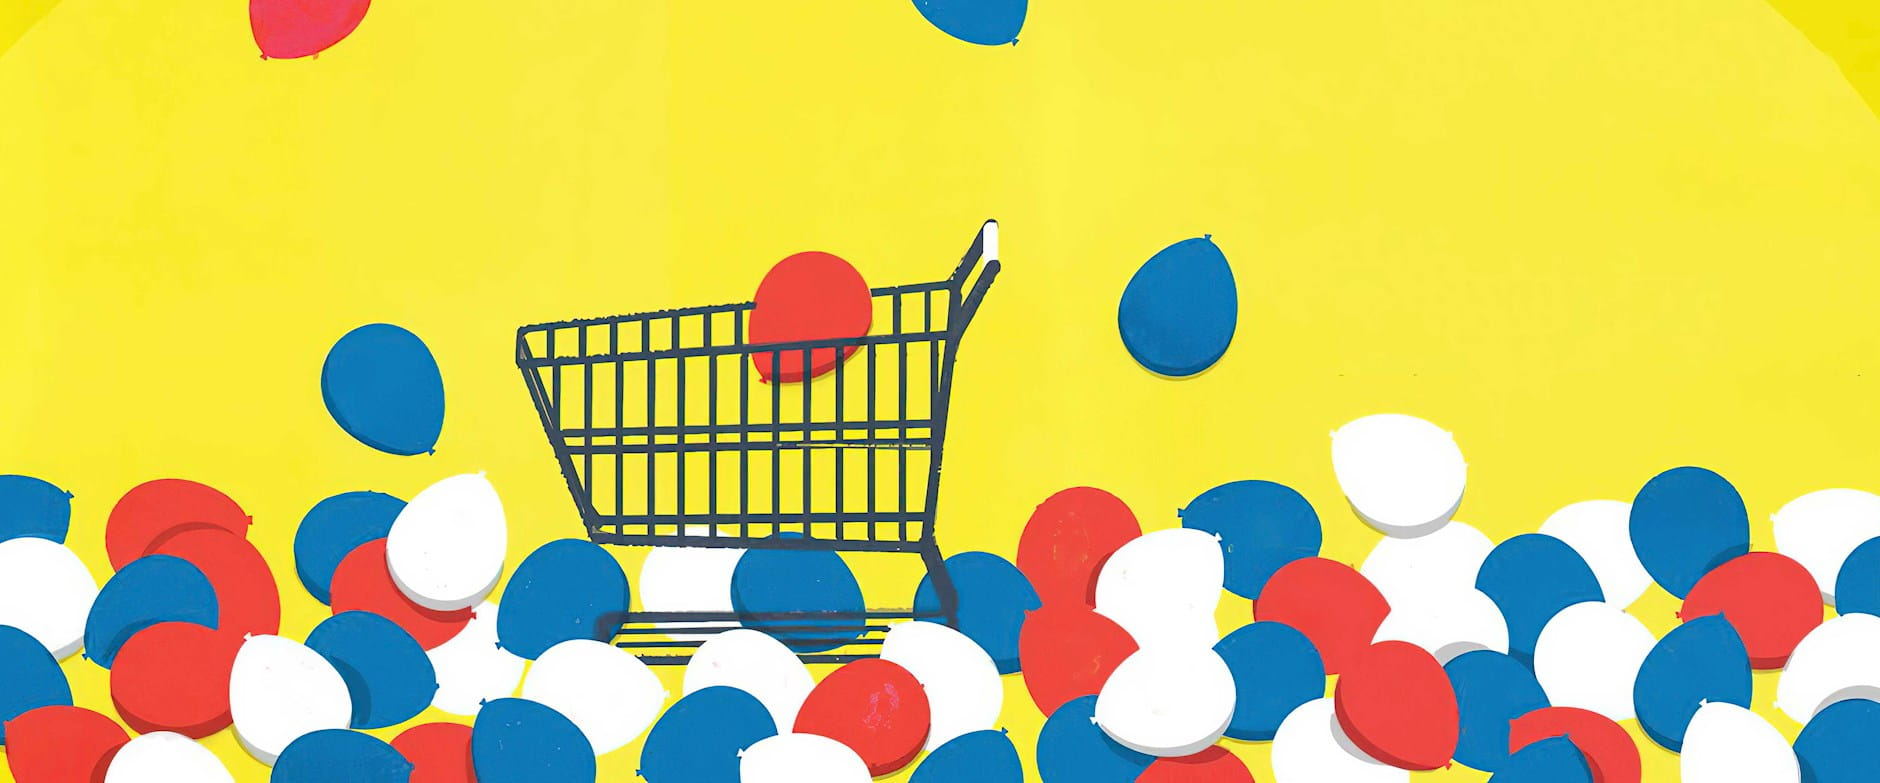 Shopping cart underneath red, white, and blue balloons falling on it